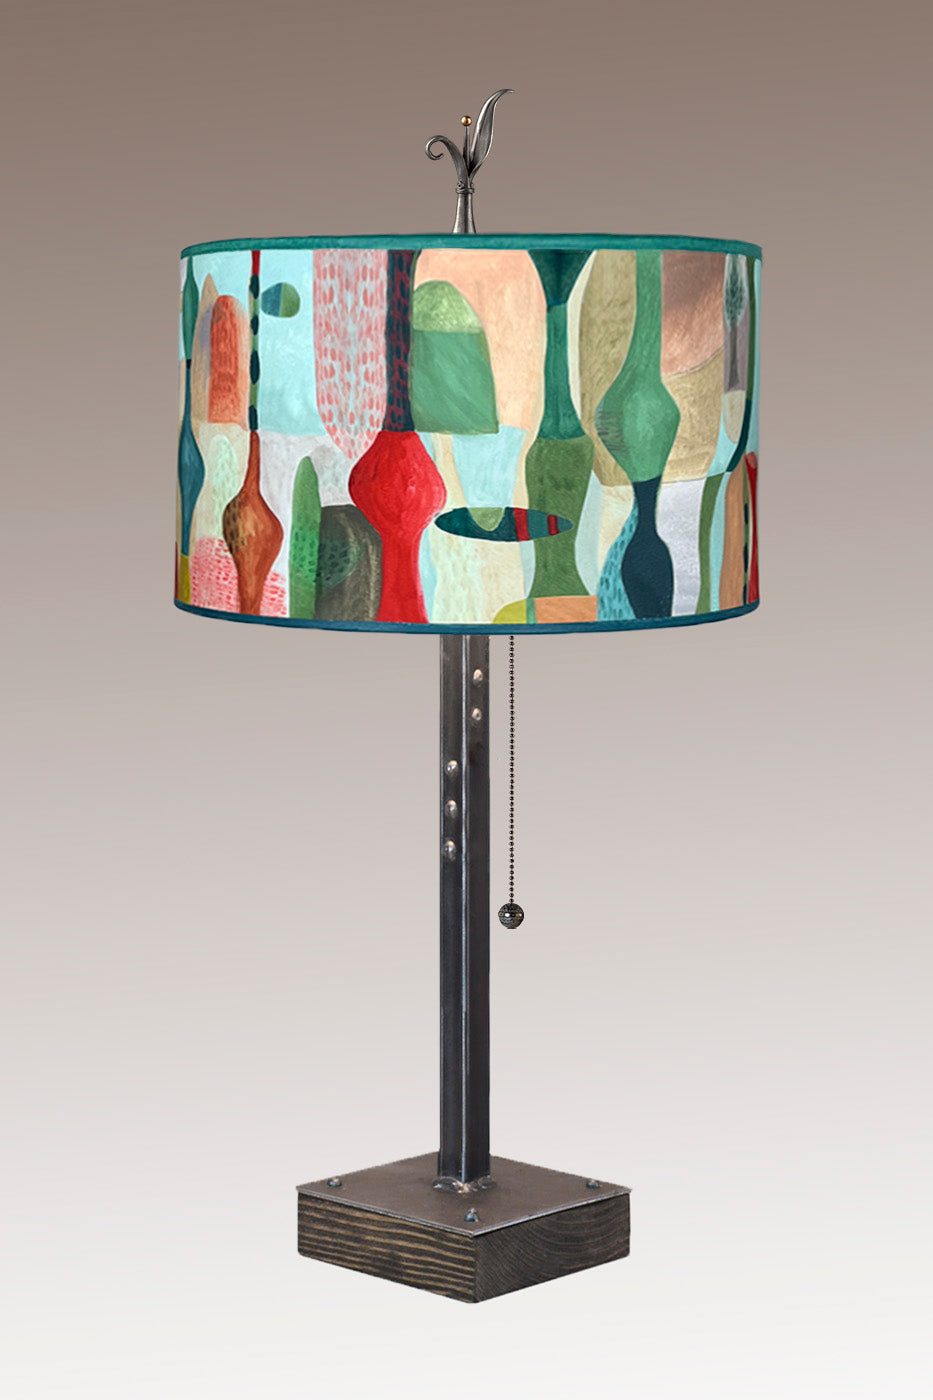 Steel Table Lamp on Wood with Large Drum Shade in Riviera in Poppy